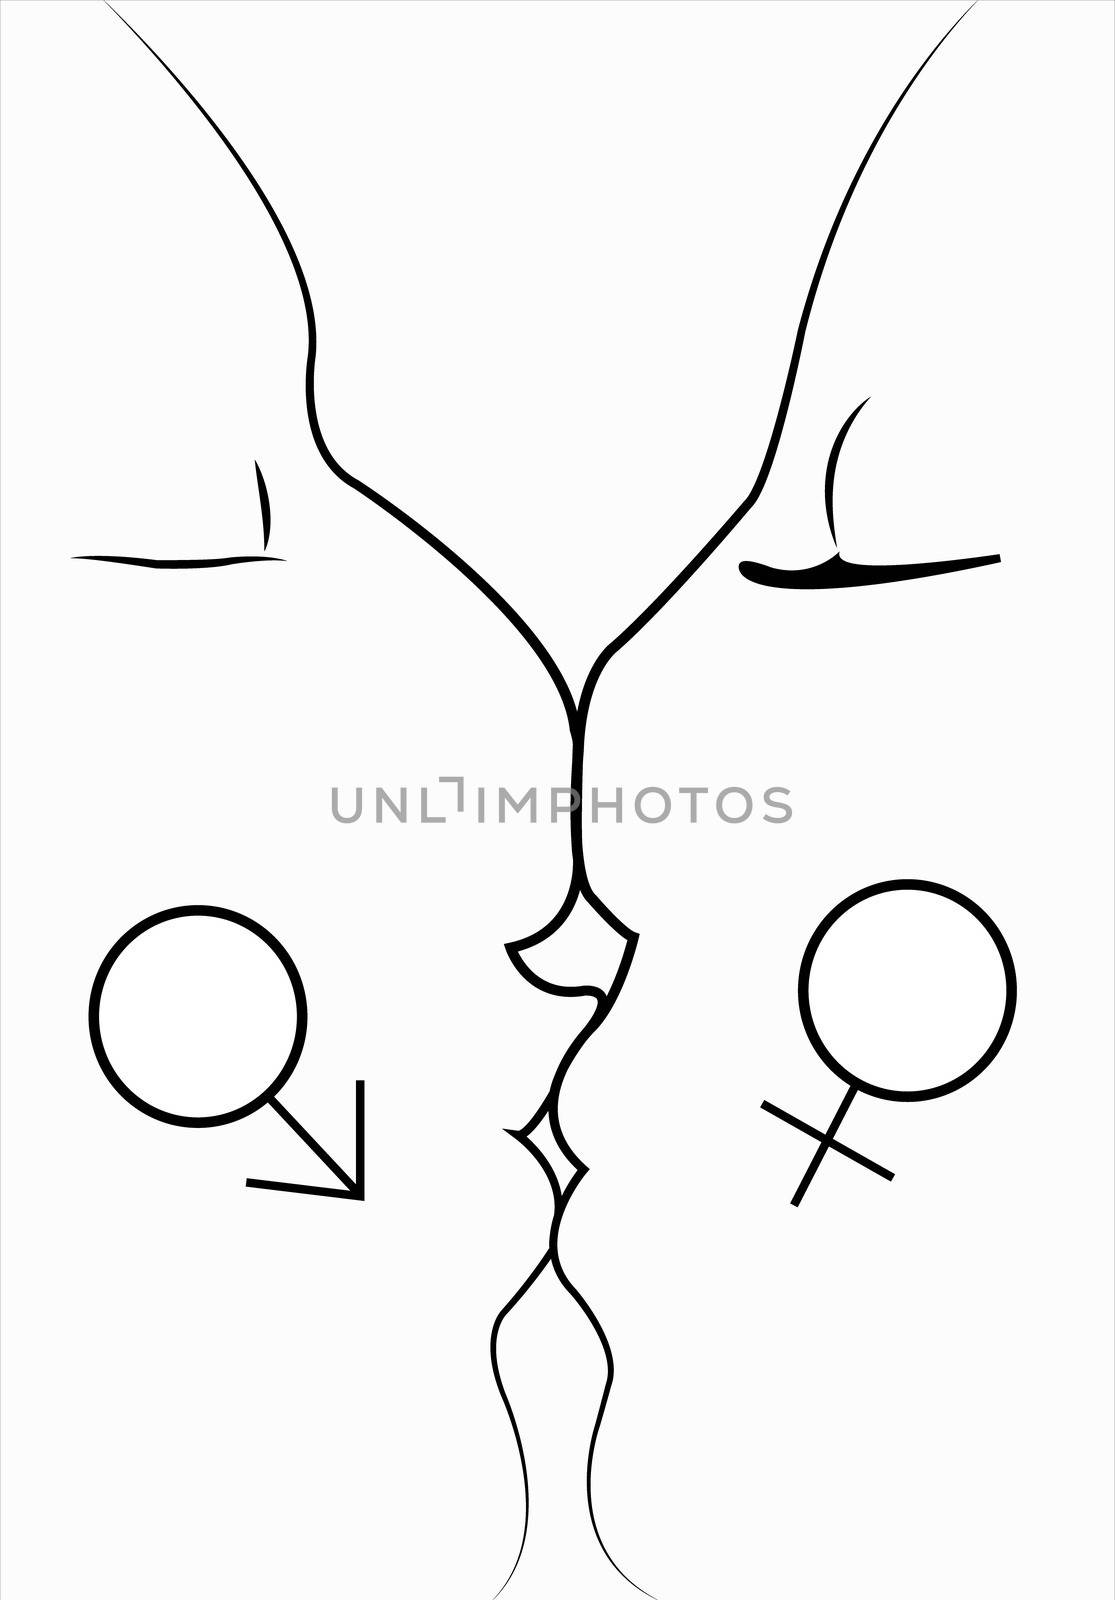 silhouette vector of a couple